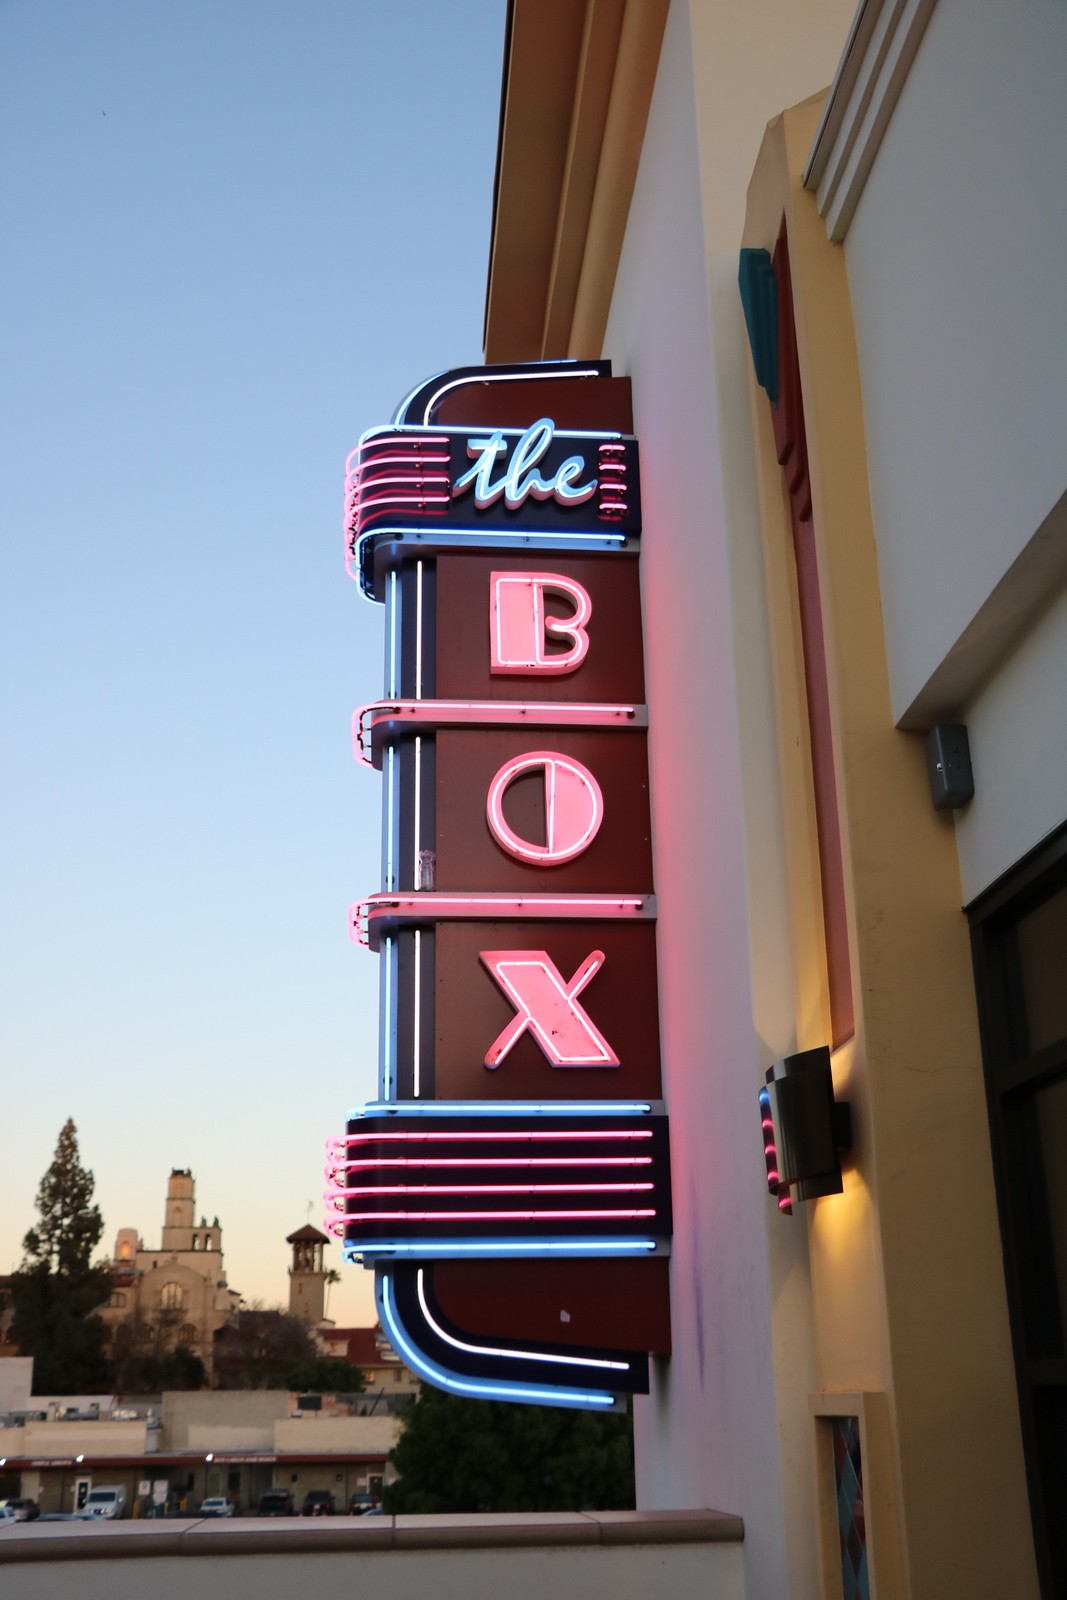  22nd Annual Riverside International Film Festival   April 10th -14th   The Box, Downtown Riverside   See the Schedule  